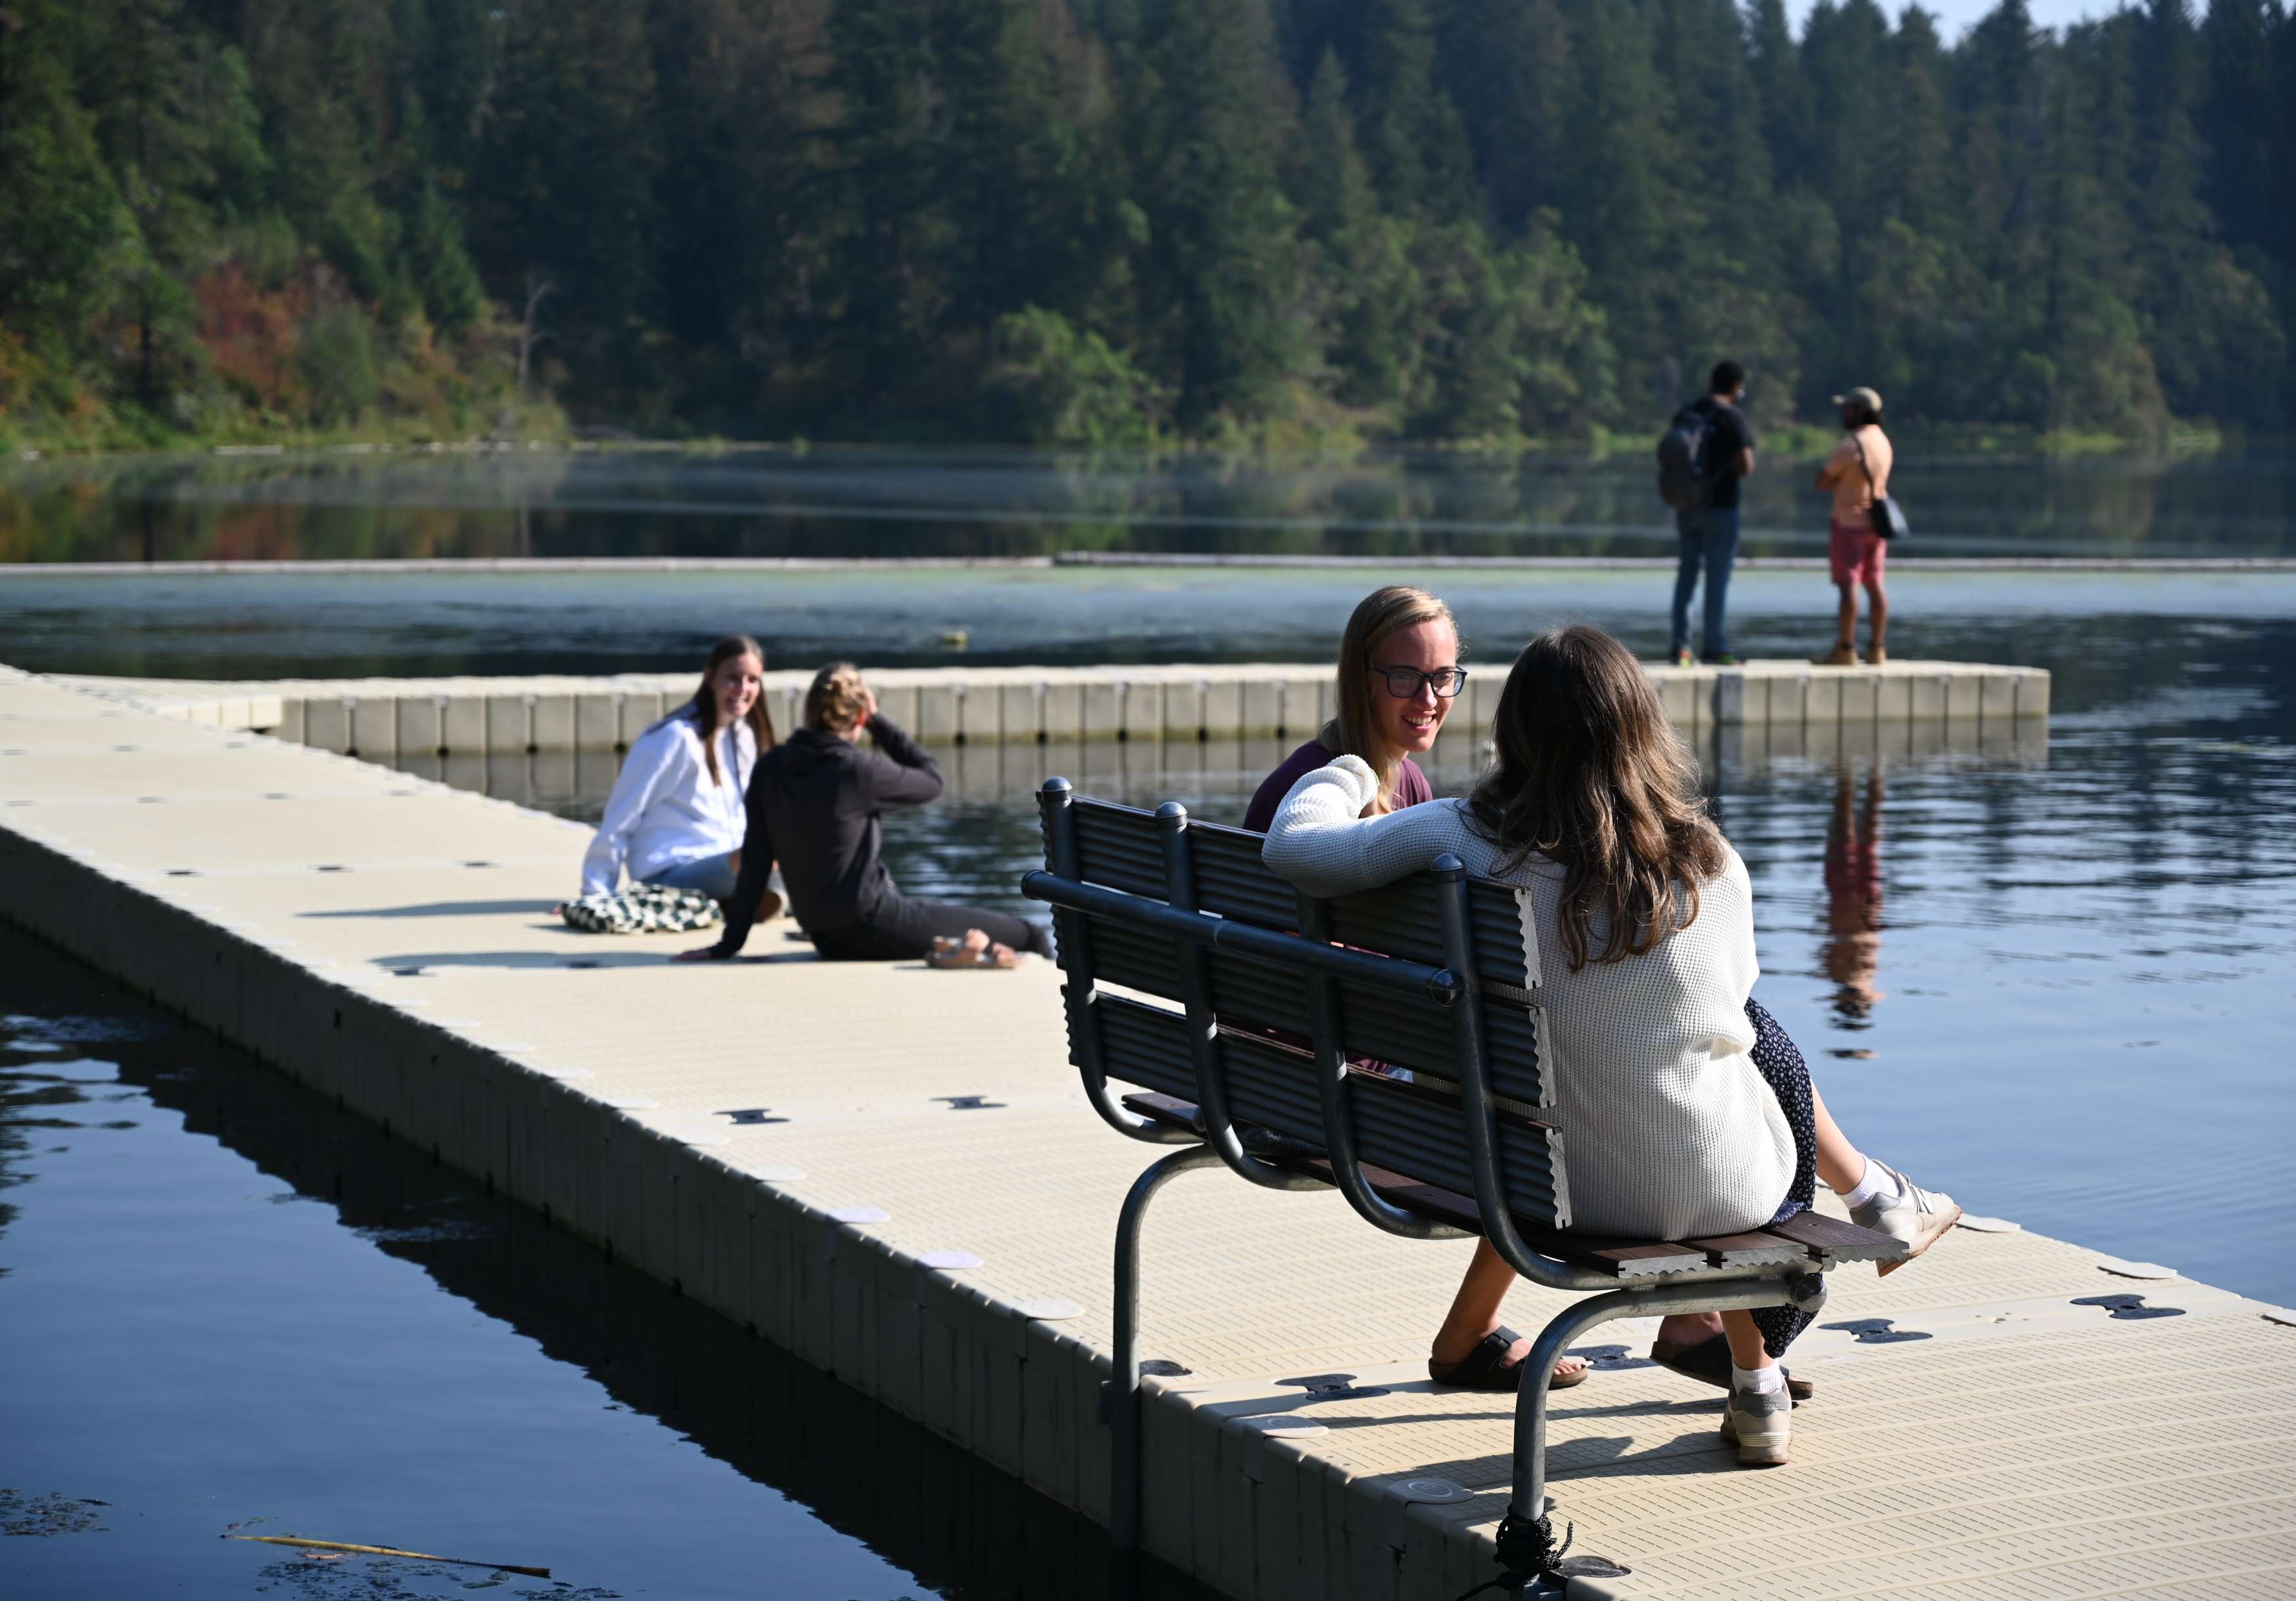 Two young women talk to each other on a bench near a lake, with two other sets of people on the dock behind them. Pine trees are in the distance. This is from the Vision & Call 2022 Retreat.